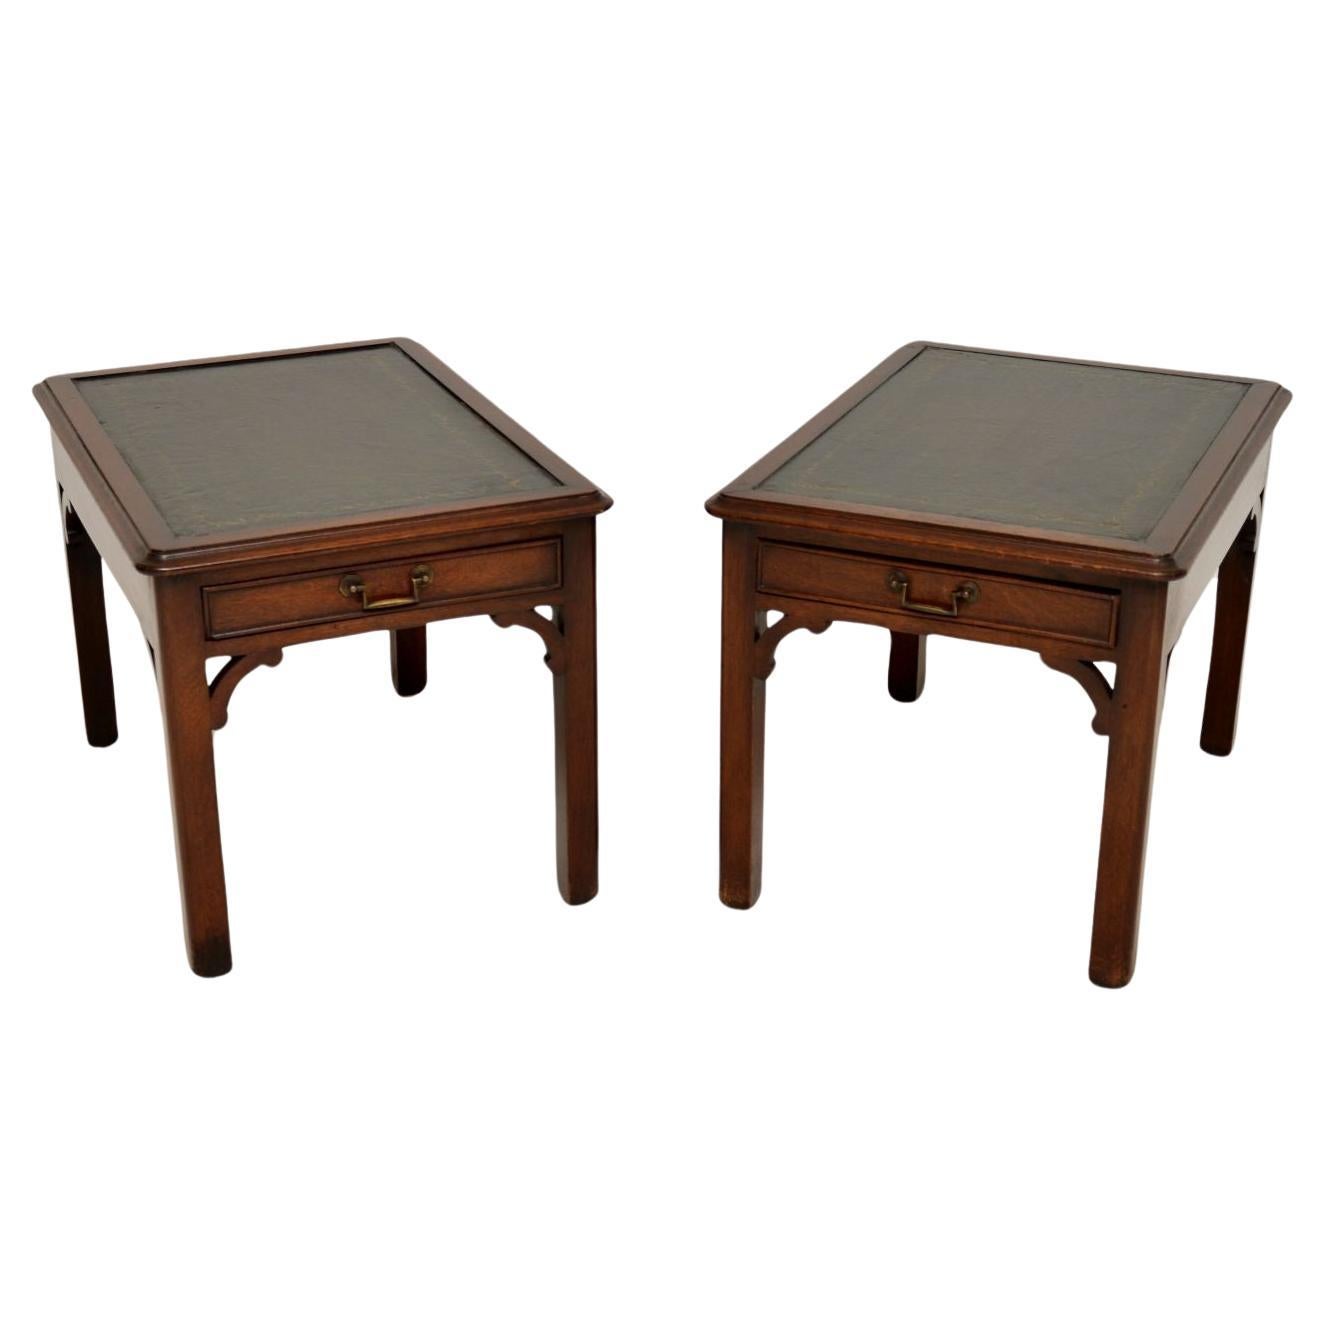 Pair of Antique Leather Top Side Tables For Sale